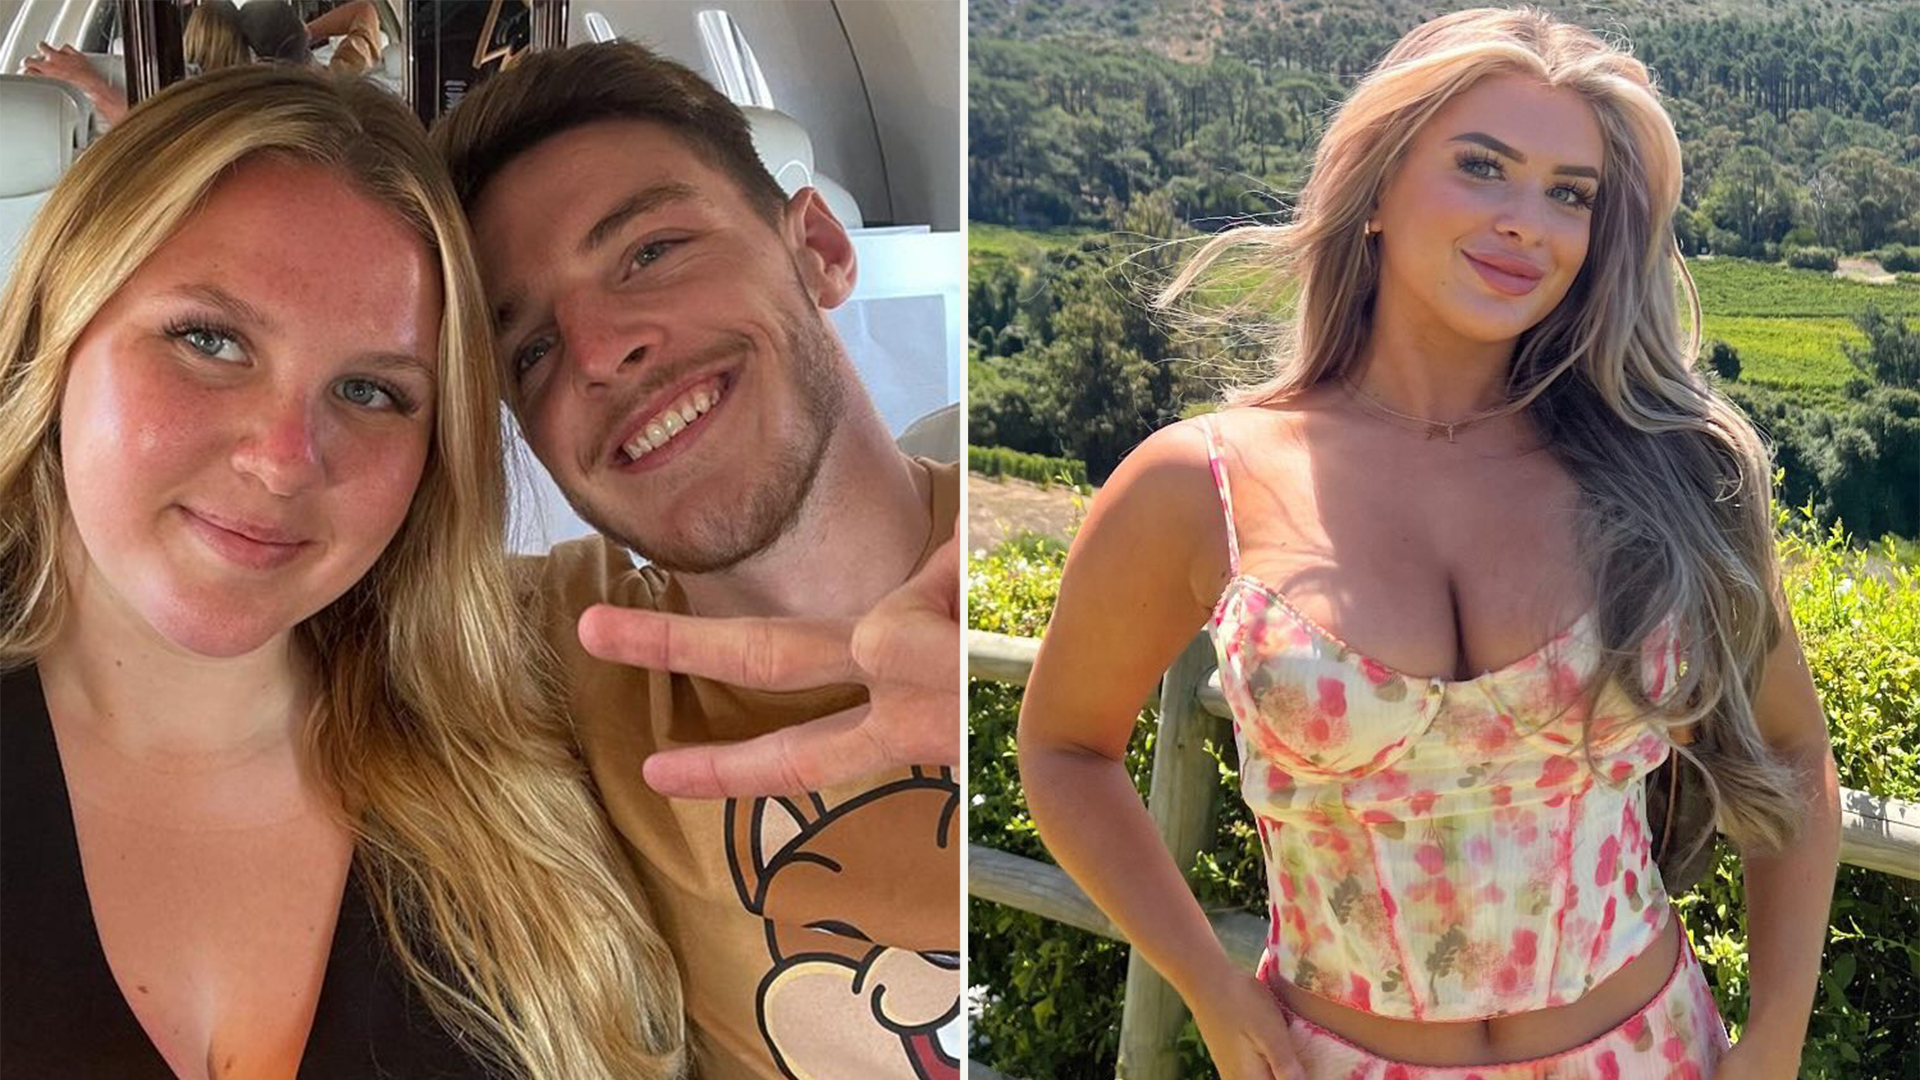 “Arsenal Ace’s Girlfriend’s Instagram Cleanup Sparks Controversy – Love Island Star Defends Against Bullying” #ArsenalAce #Instagram #LoveIsland #Bullying #Controversy #Defence